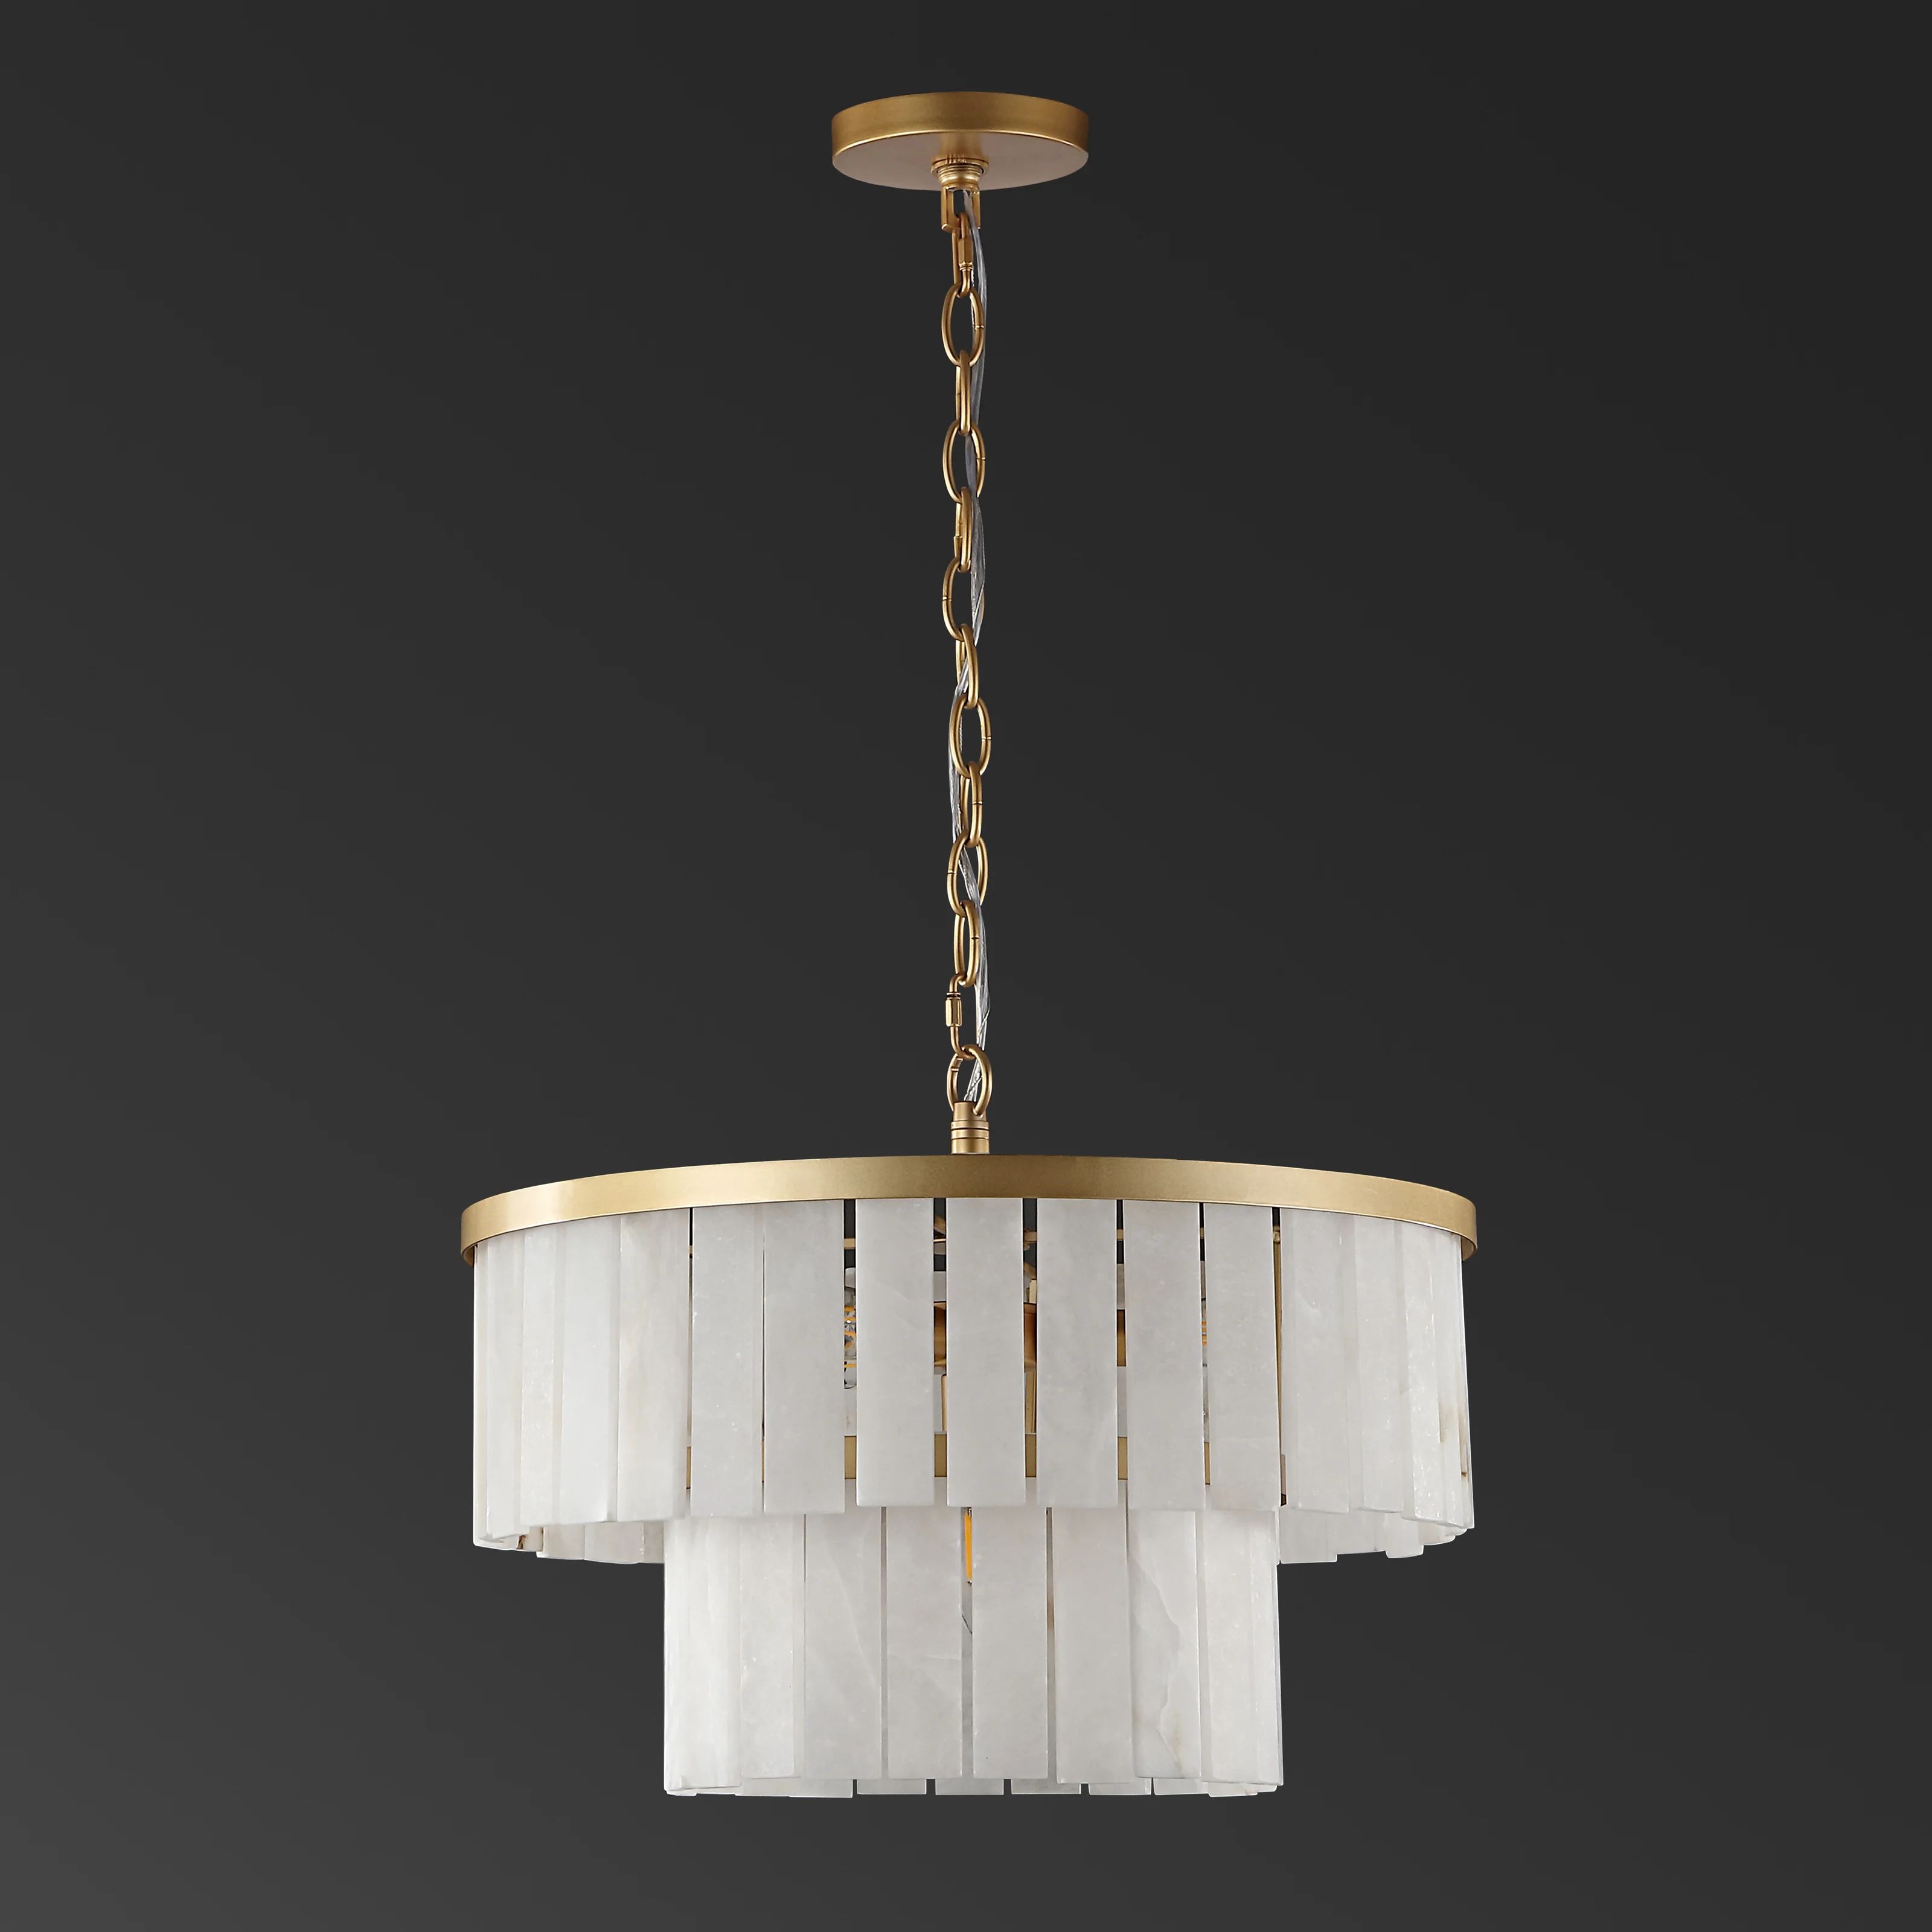 4 - Light Dimmable Tiered Chandelier | Wayfair North America